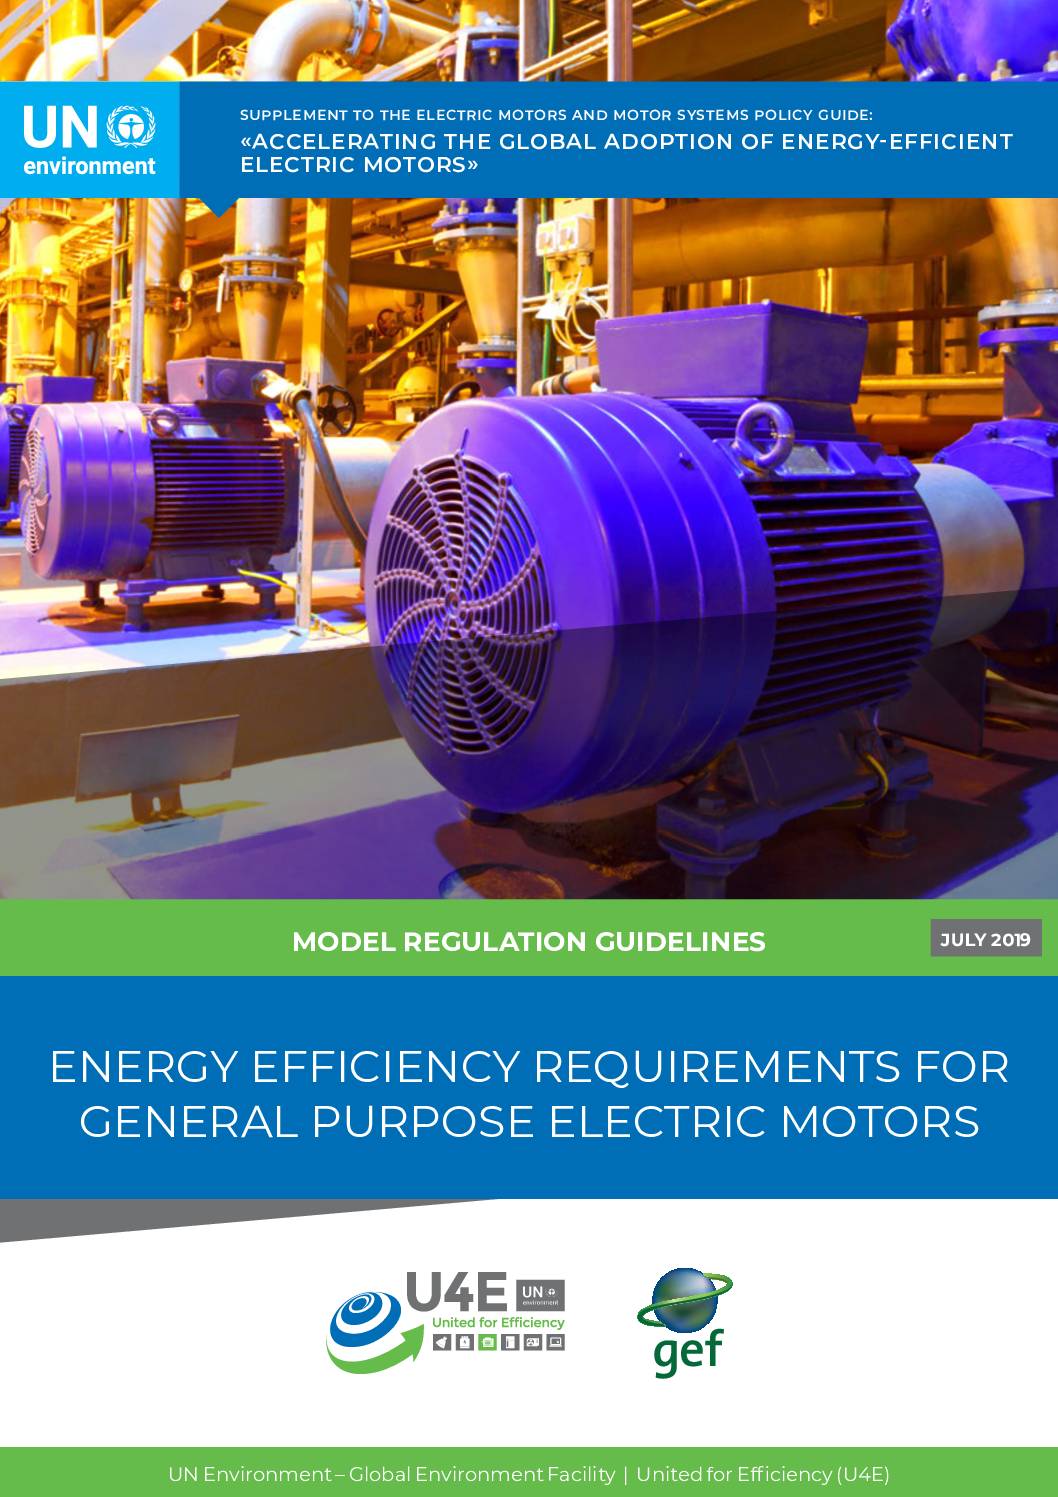 Model Regulation Guidelines For Energy-efficiency Requirements For General Purpose Electric Motors